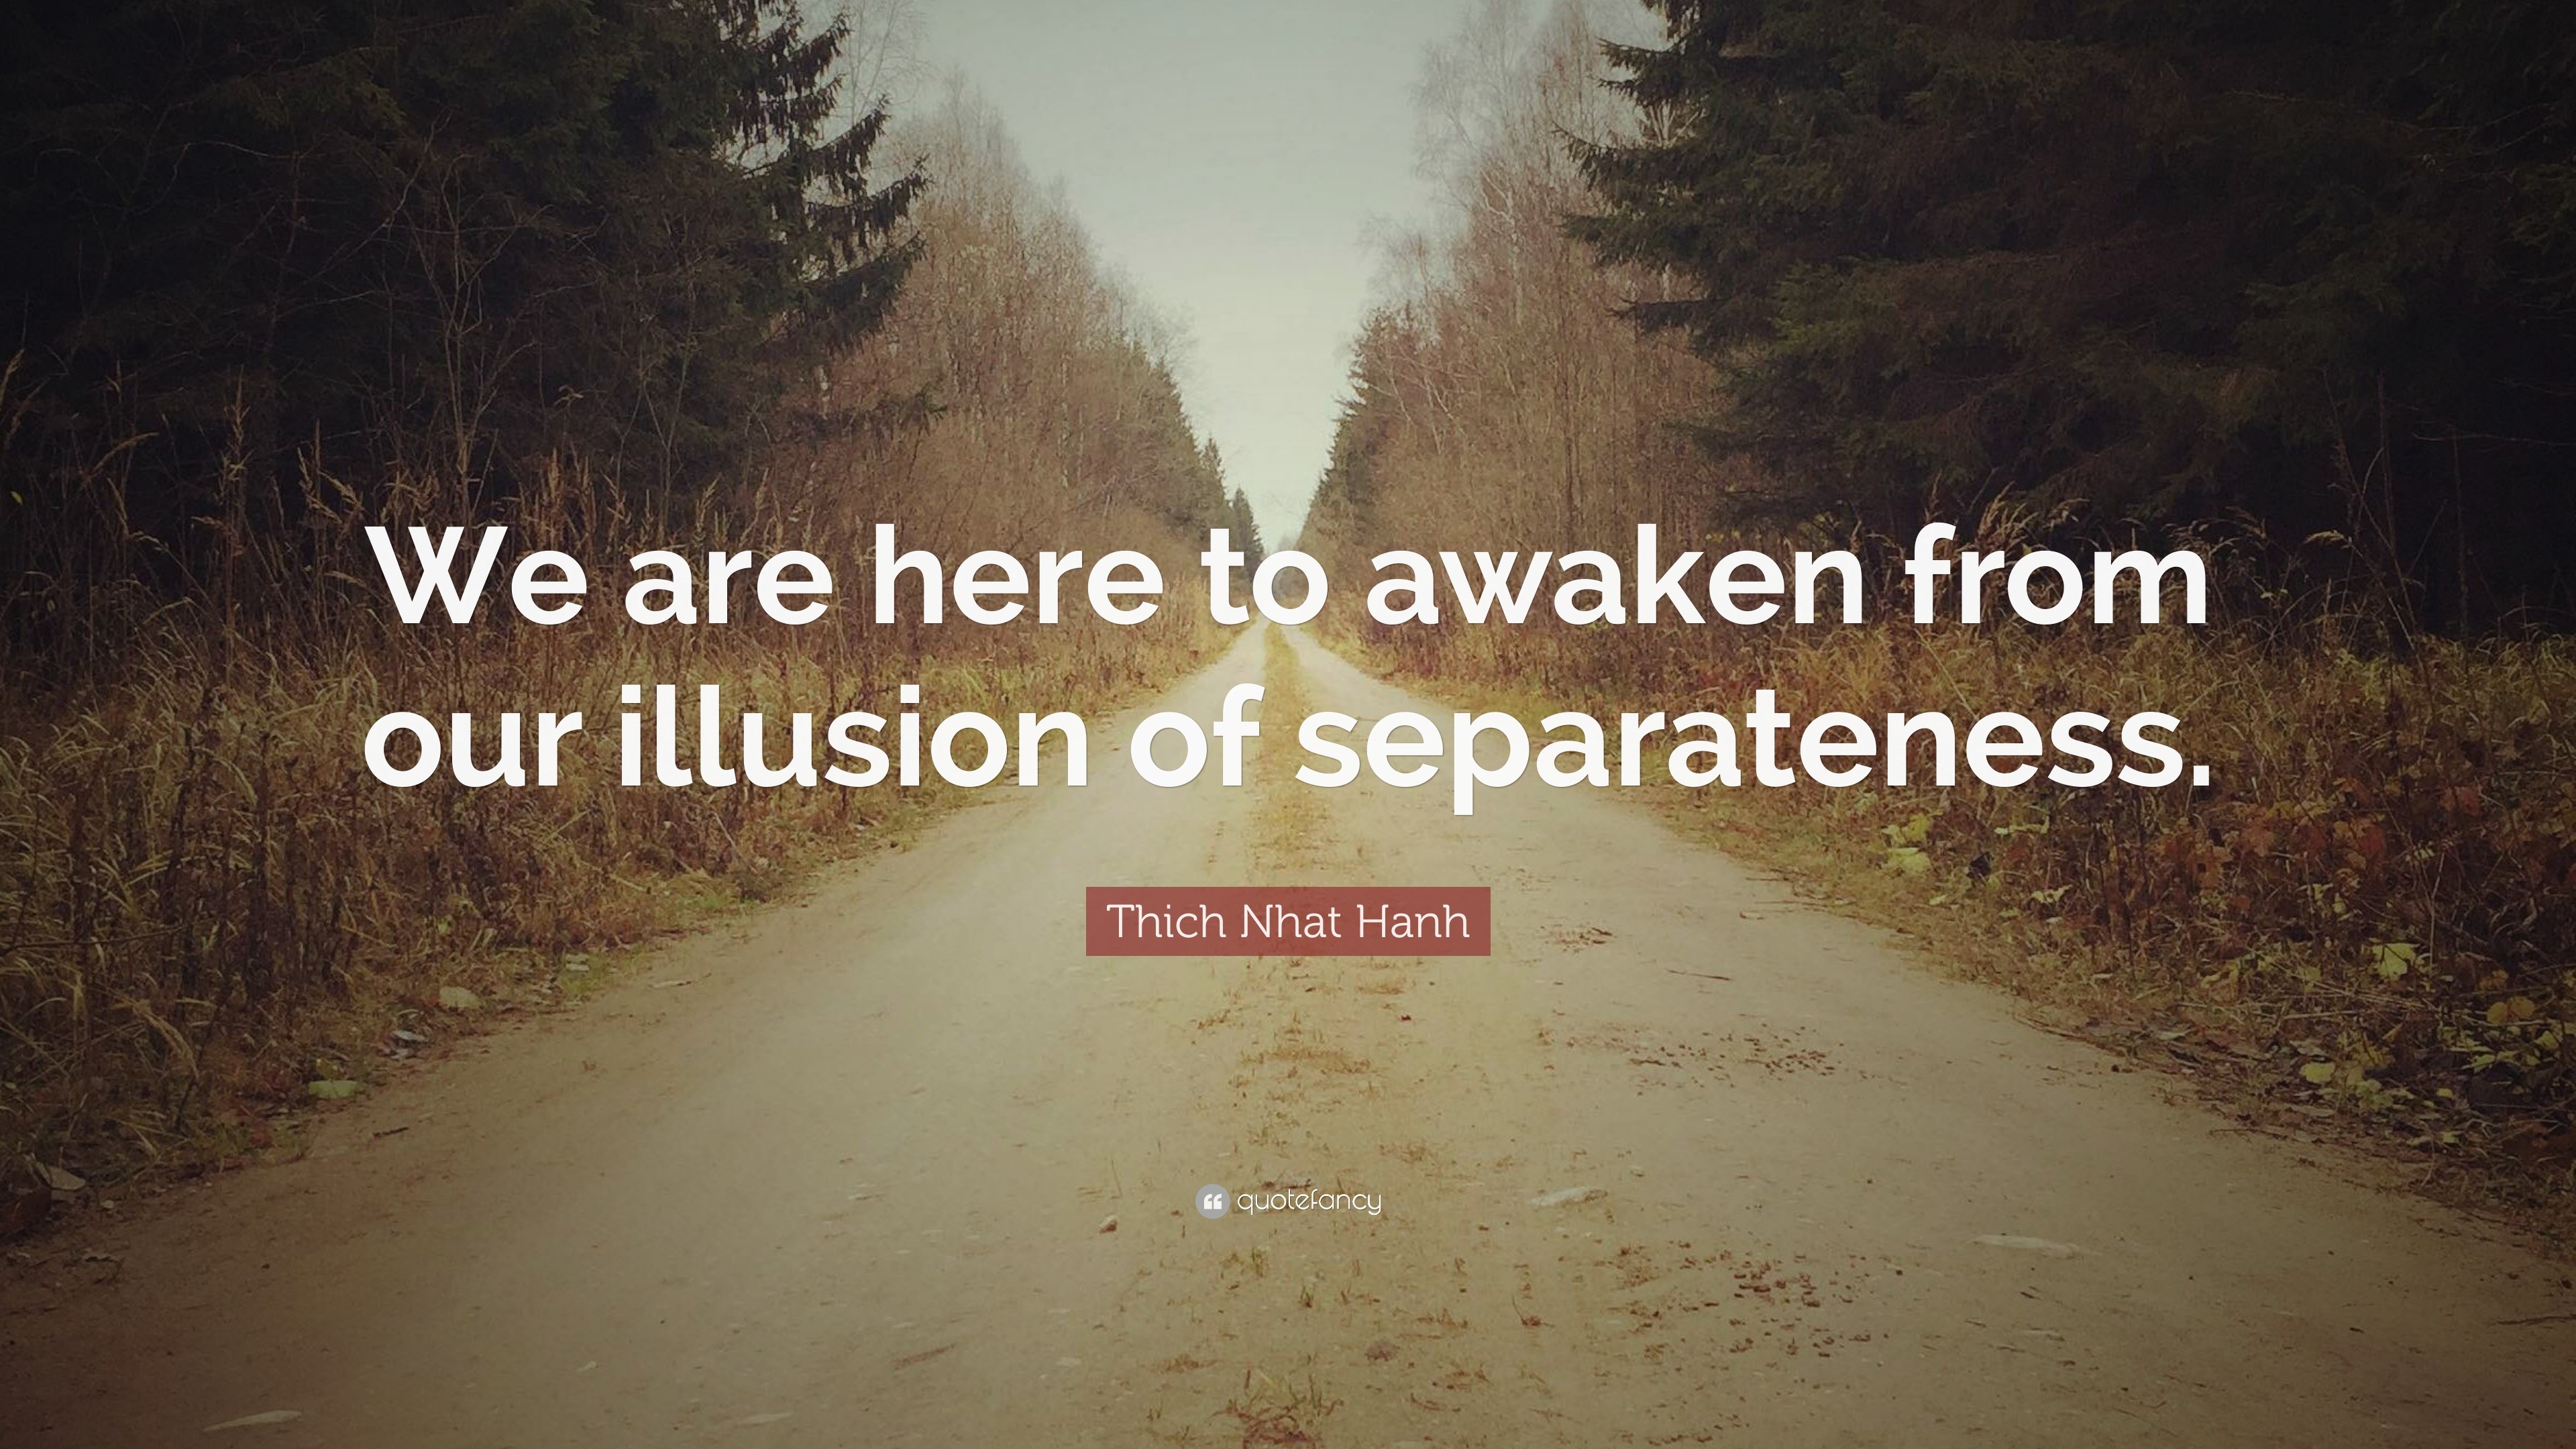 362594 Thich Nhat Hanh Quote We are here to awaken from our illusion of